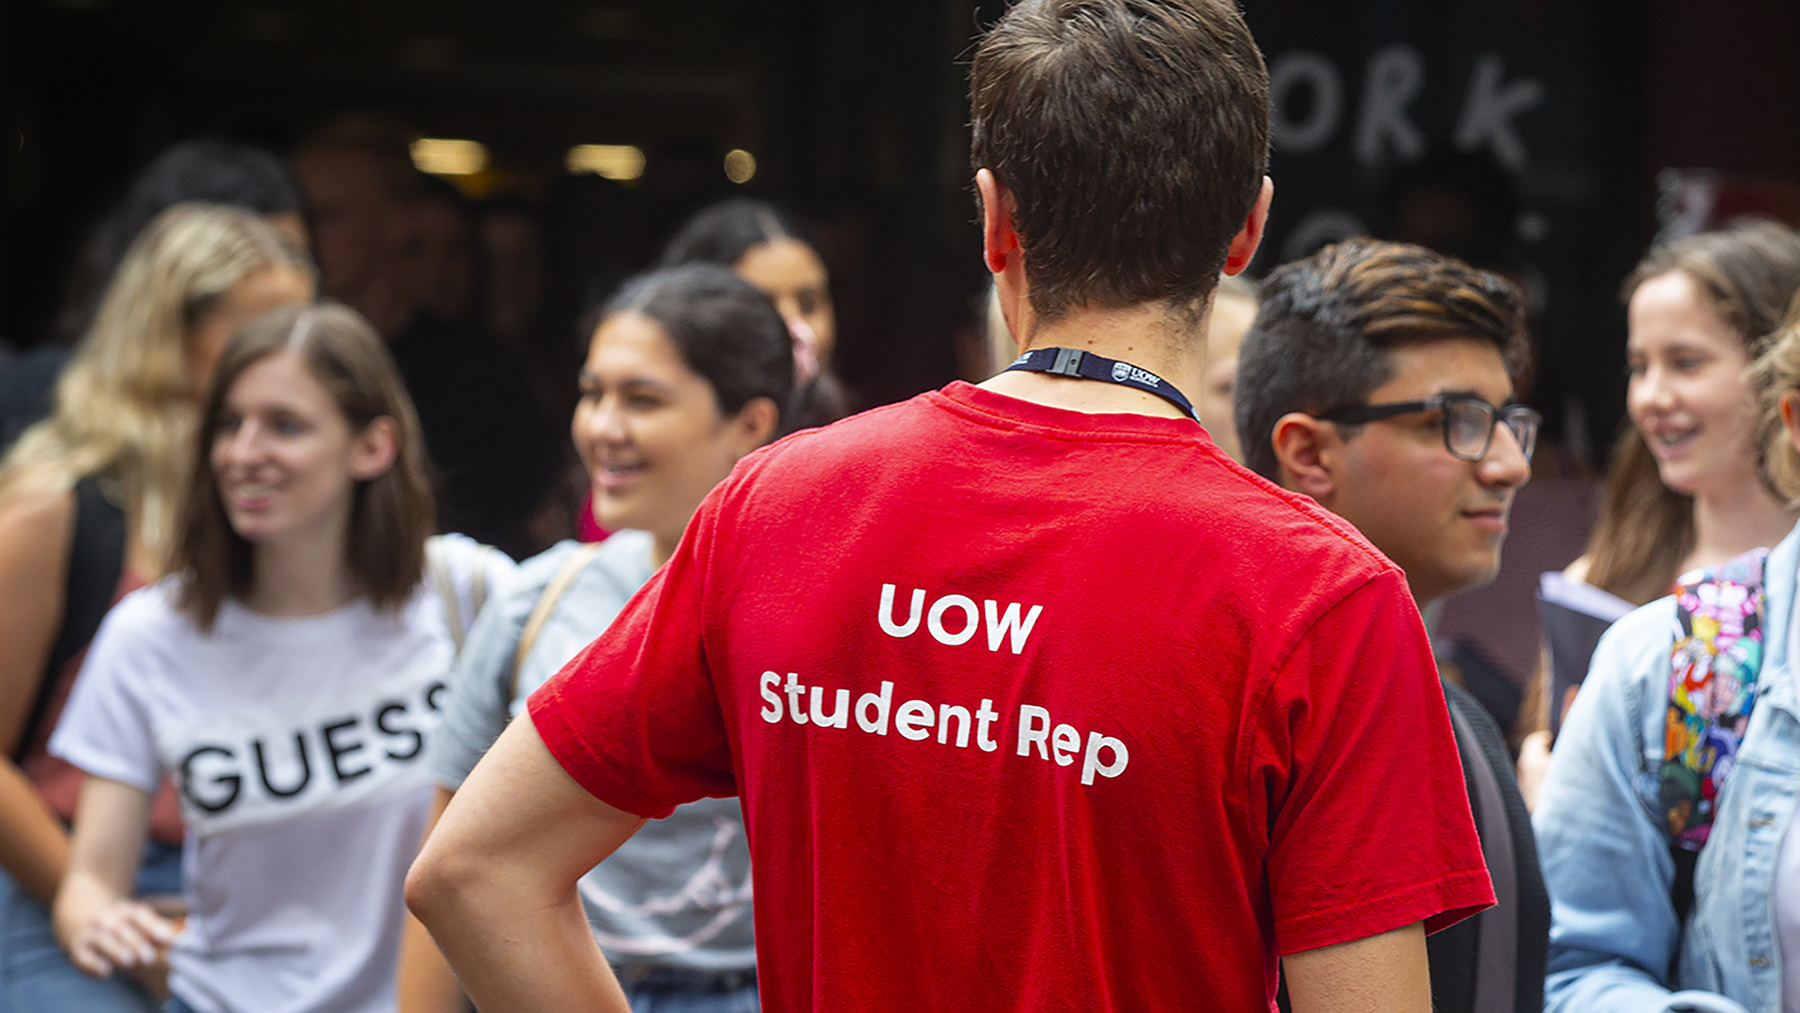 A UOW student rep guides new students at an event on campus